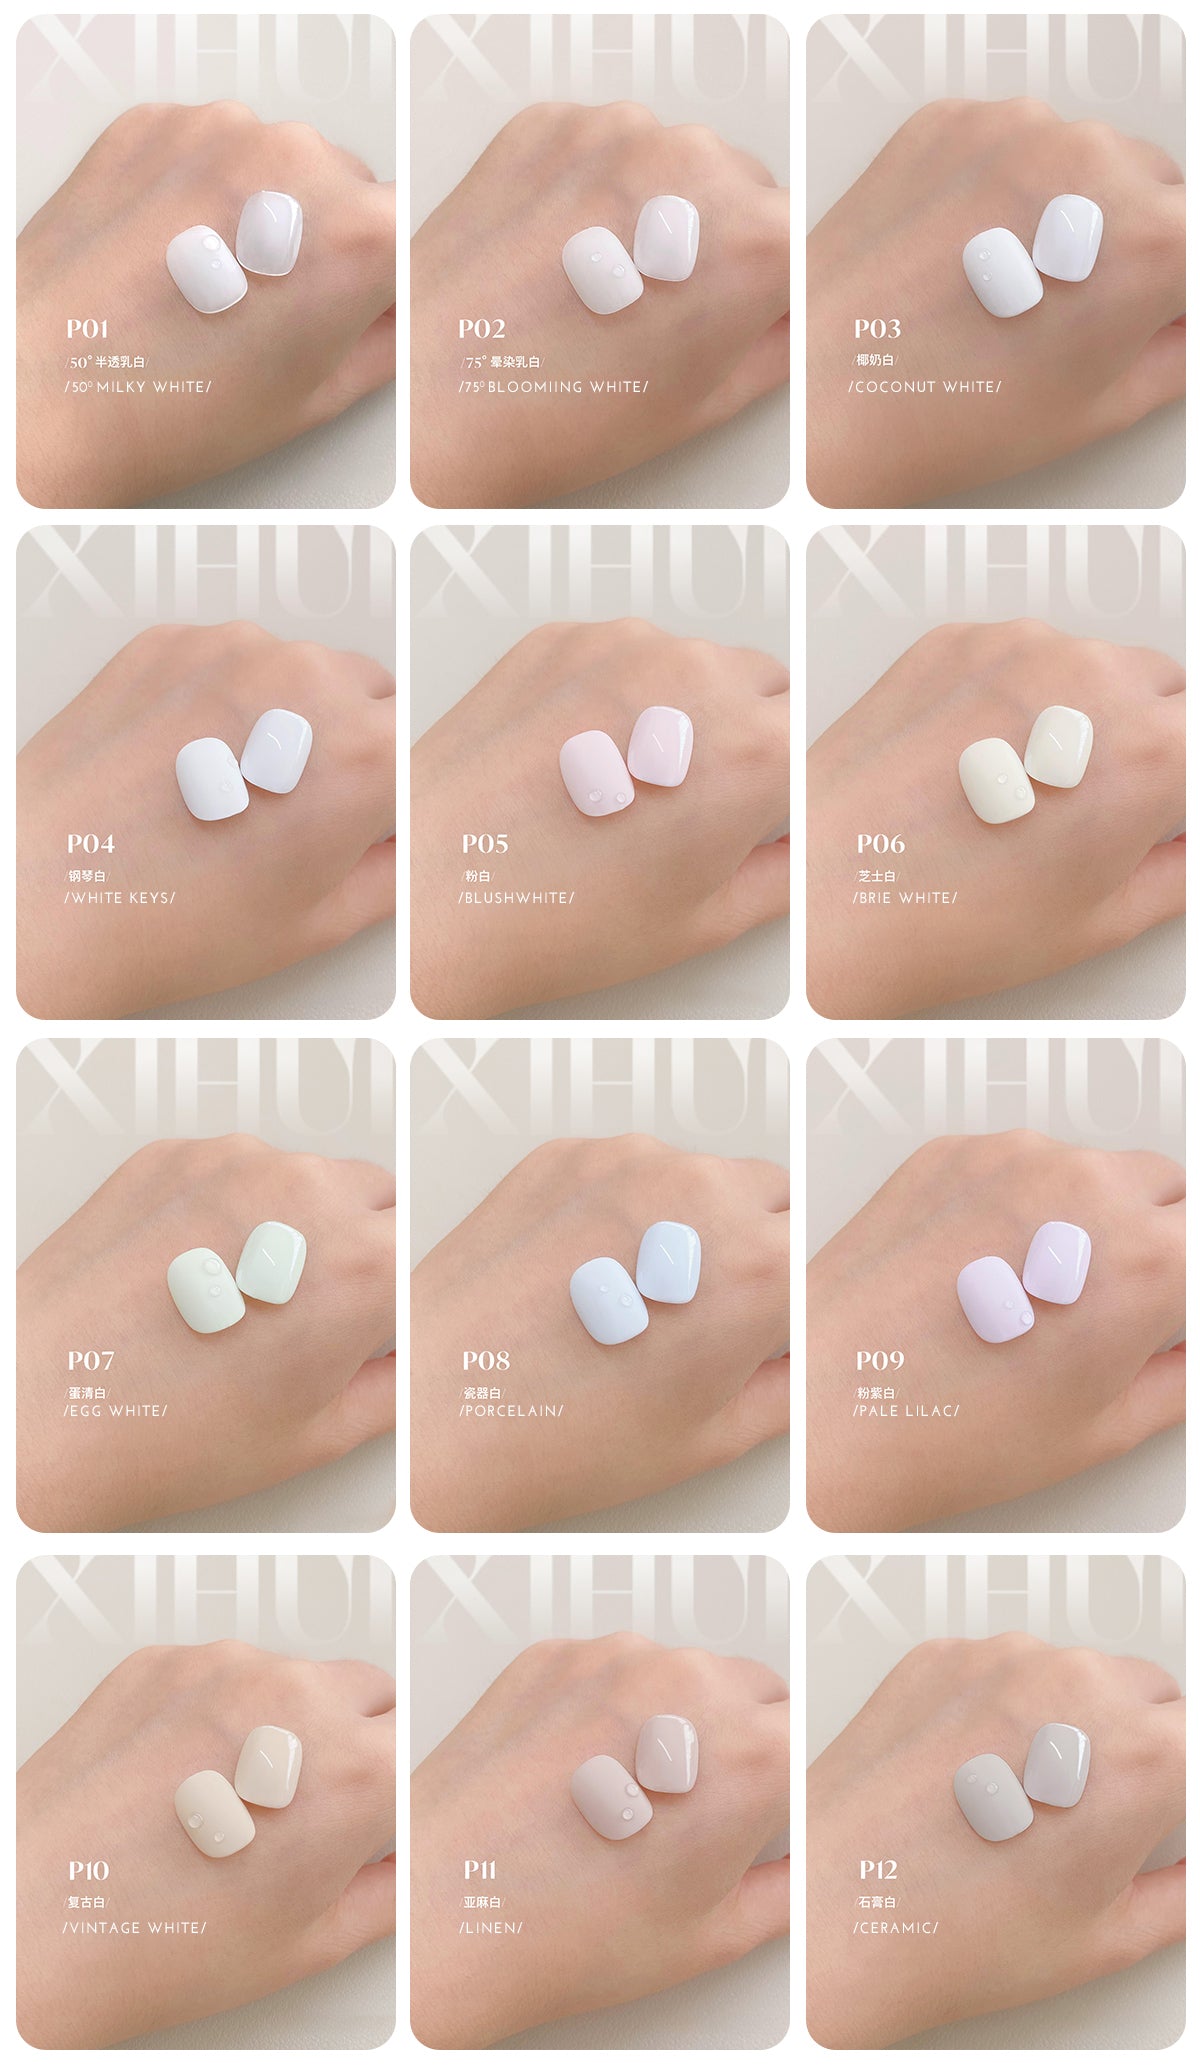 Xi Hui Swan Lake Collection Colour Swatches